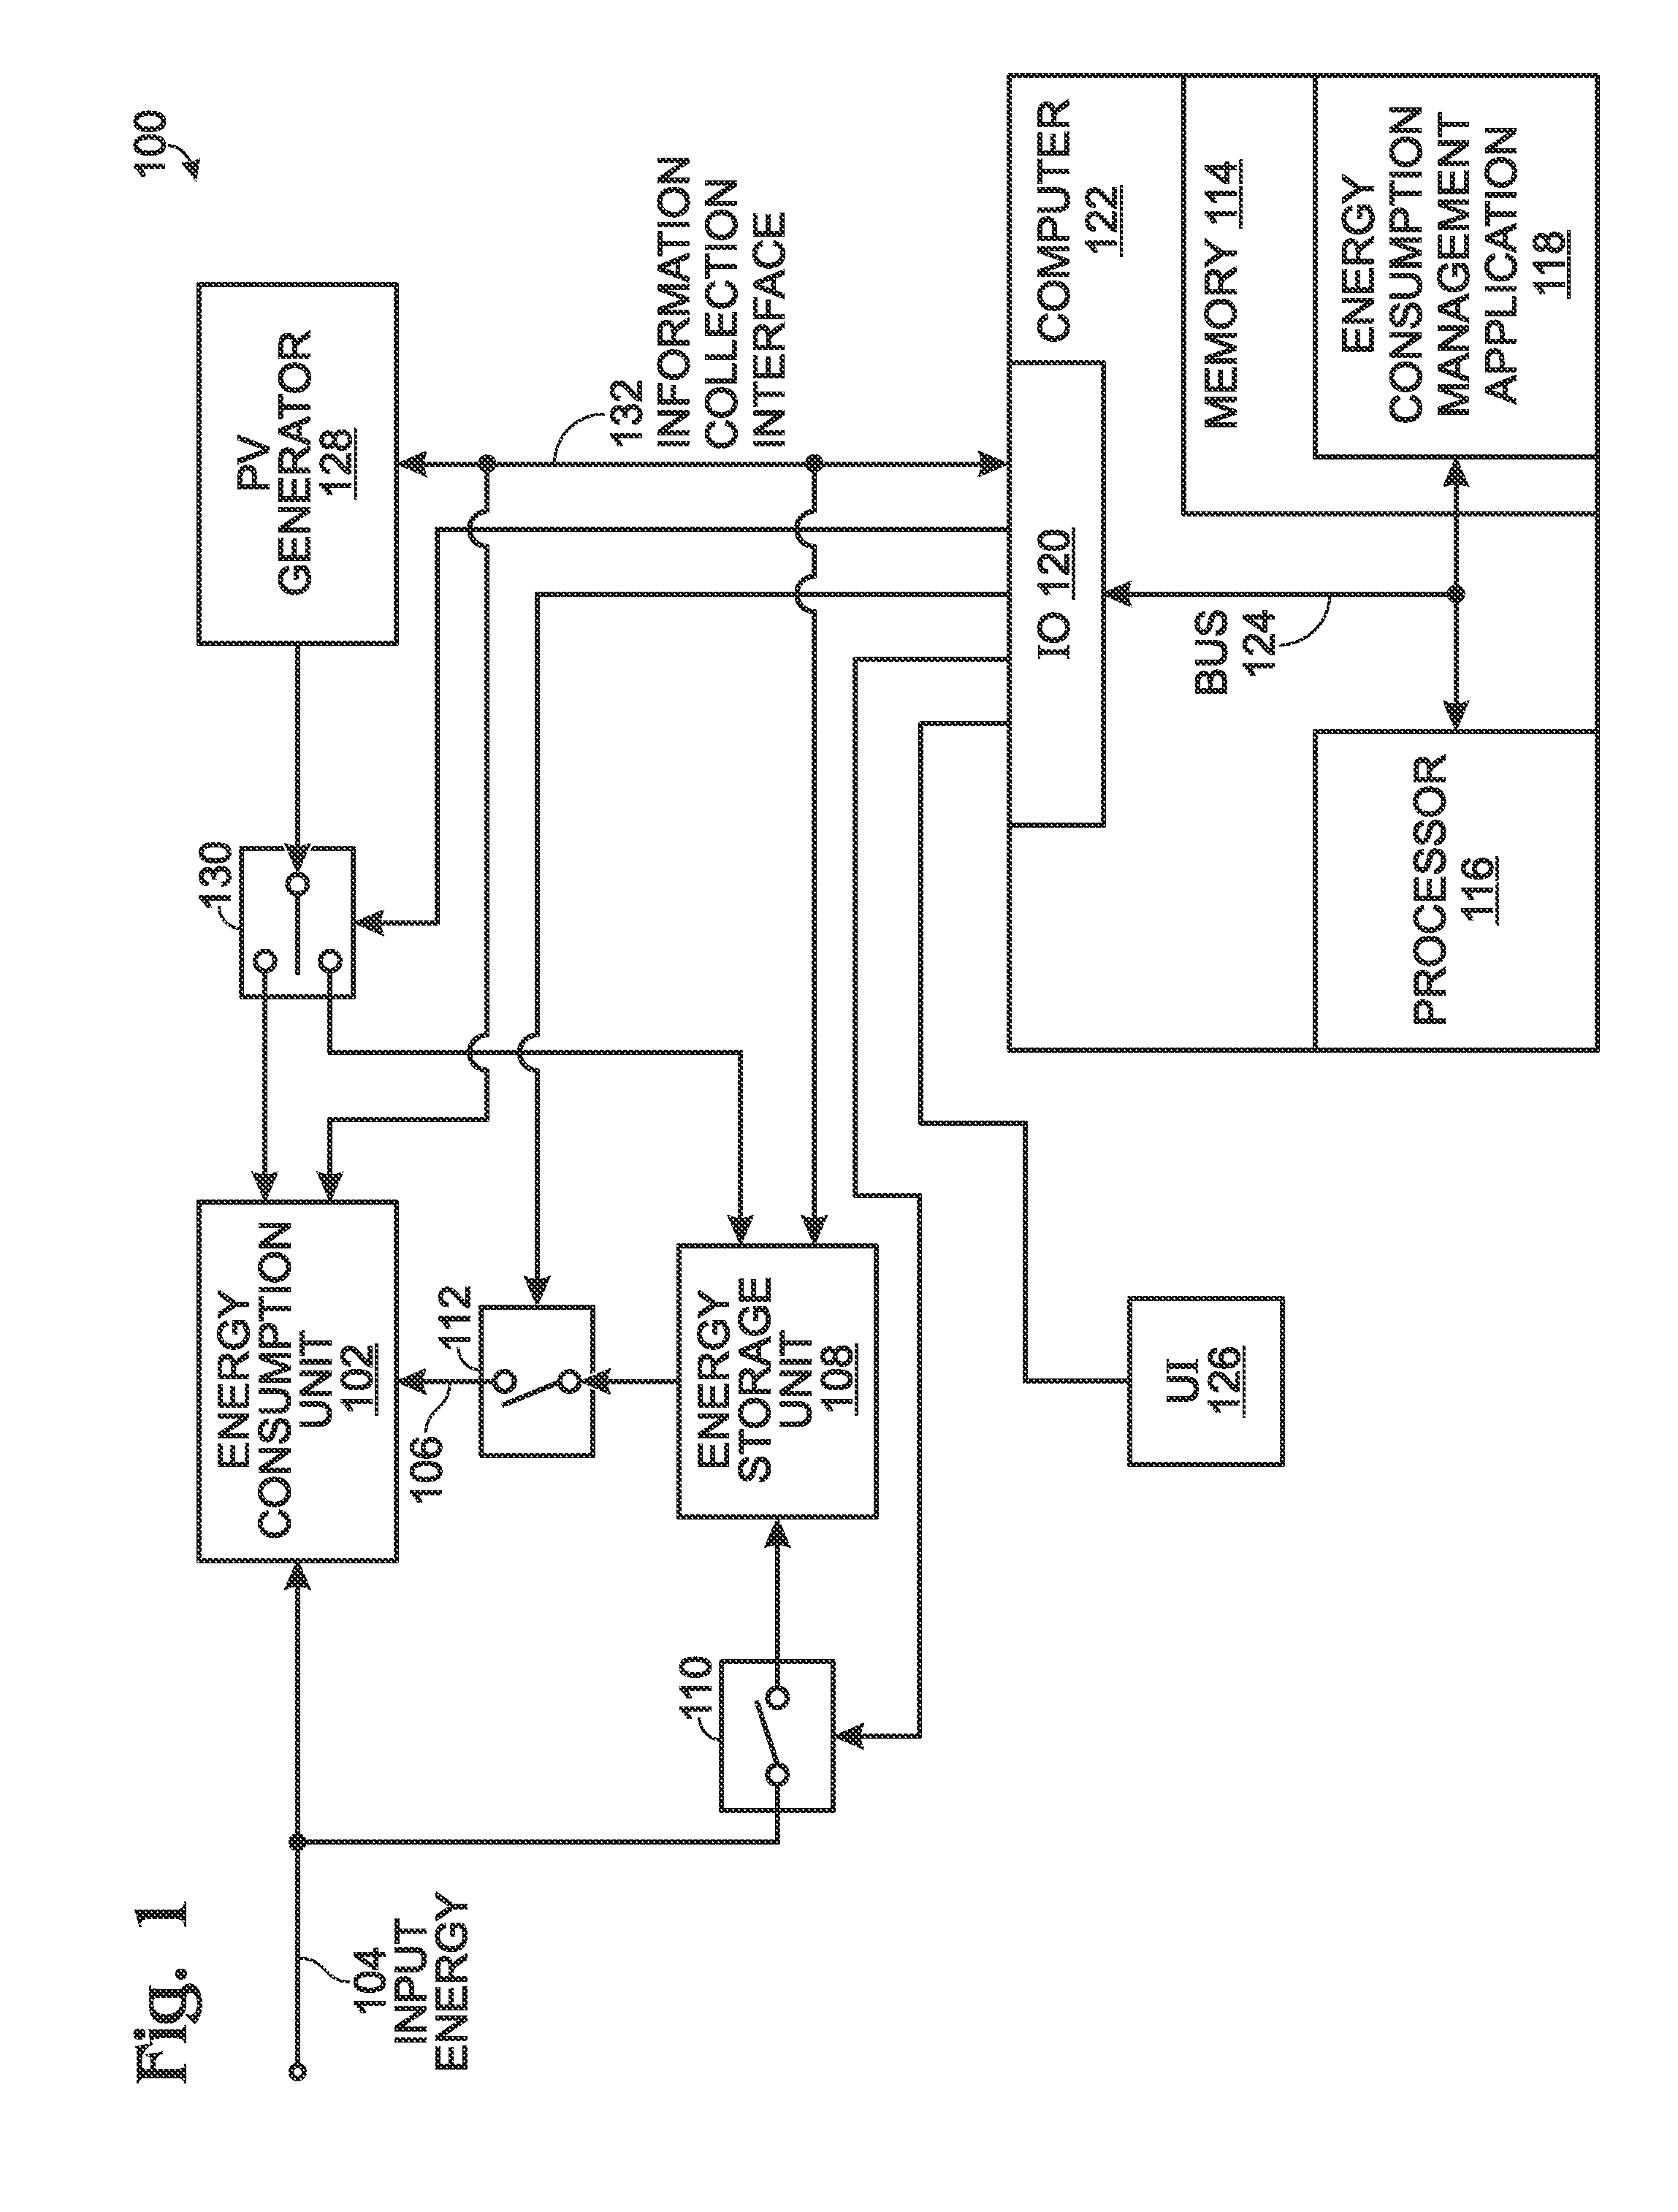 System and Method for Energy Storage Management